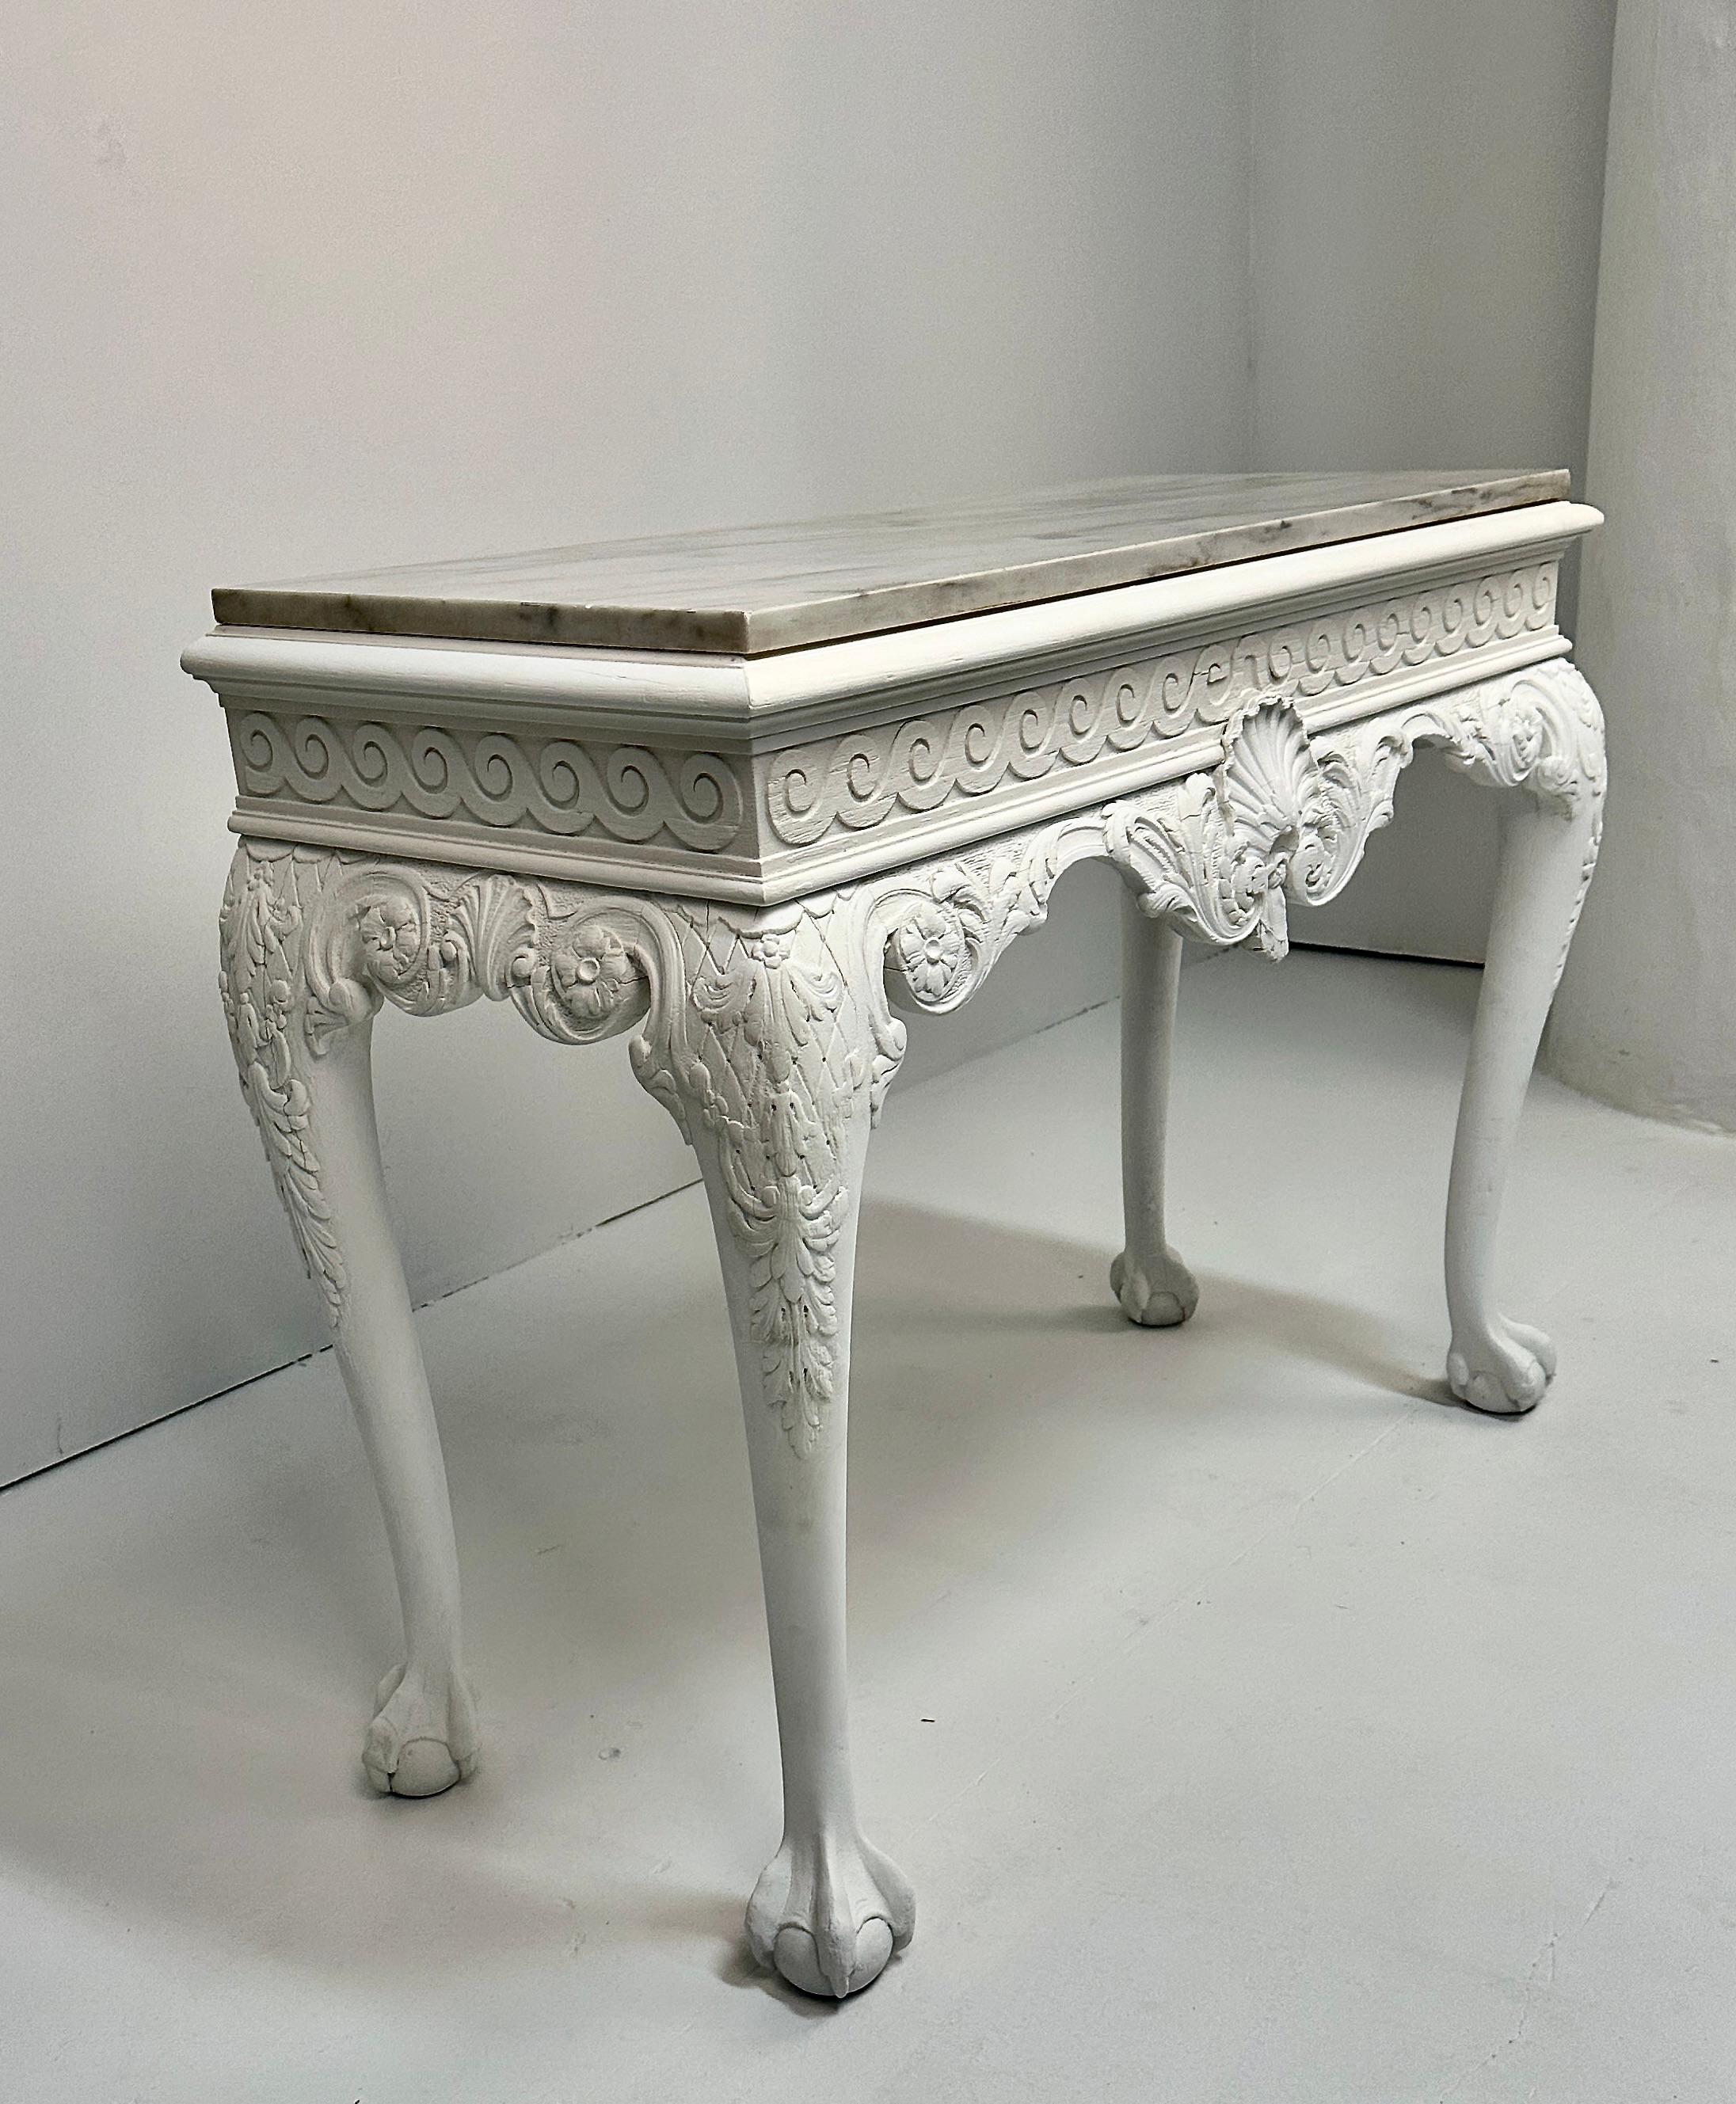 Handsome carved wood console, newly painted in a soft white, matte finish with original marble top.  Featuring classic Georgian center shell medallion  and carved wave frieze. The carved foliate cabriole legs end in ball an claw feet. Very fine